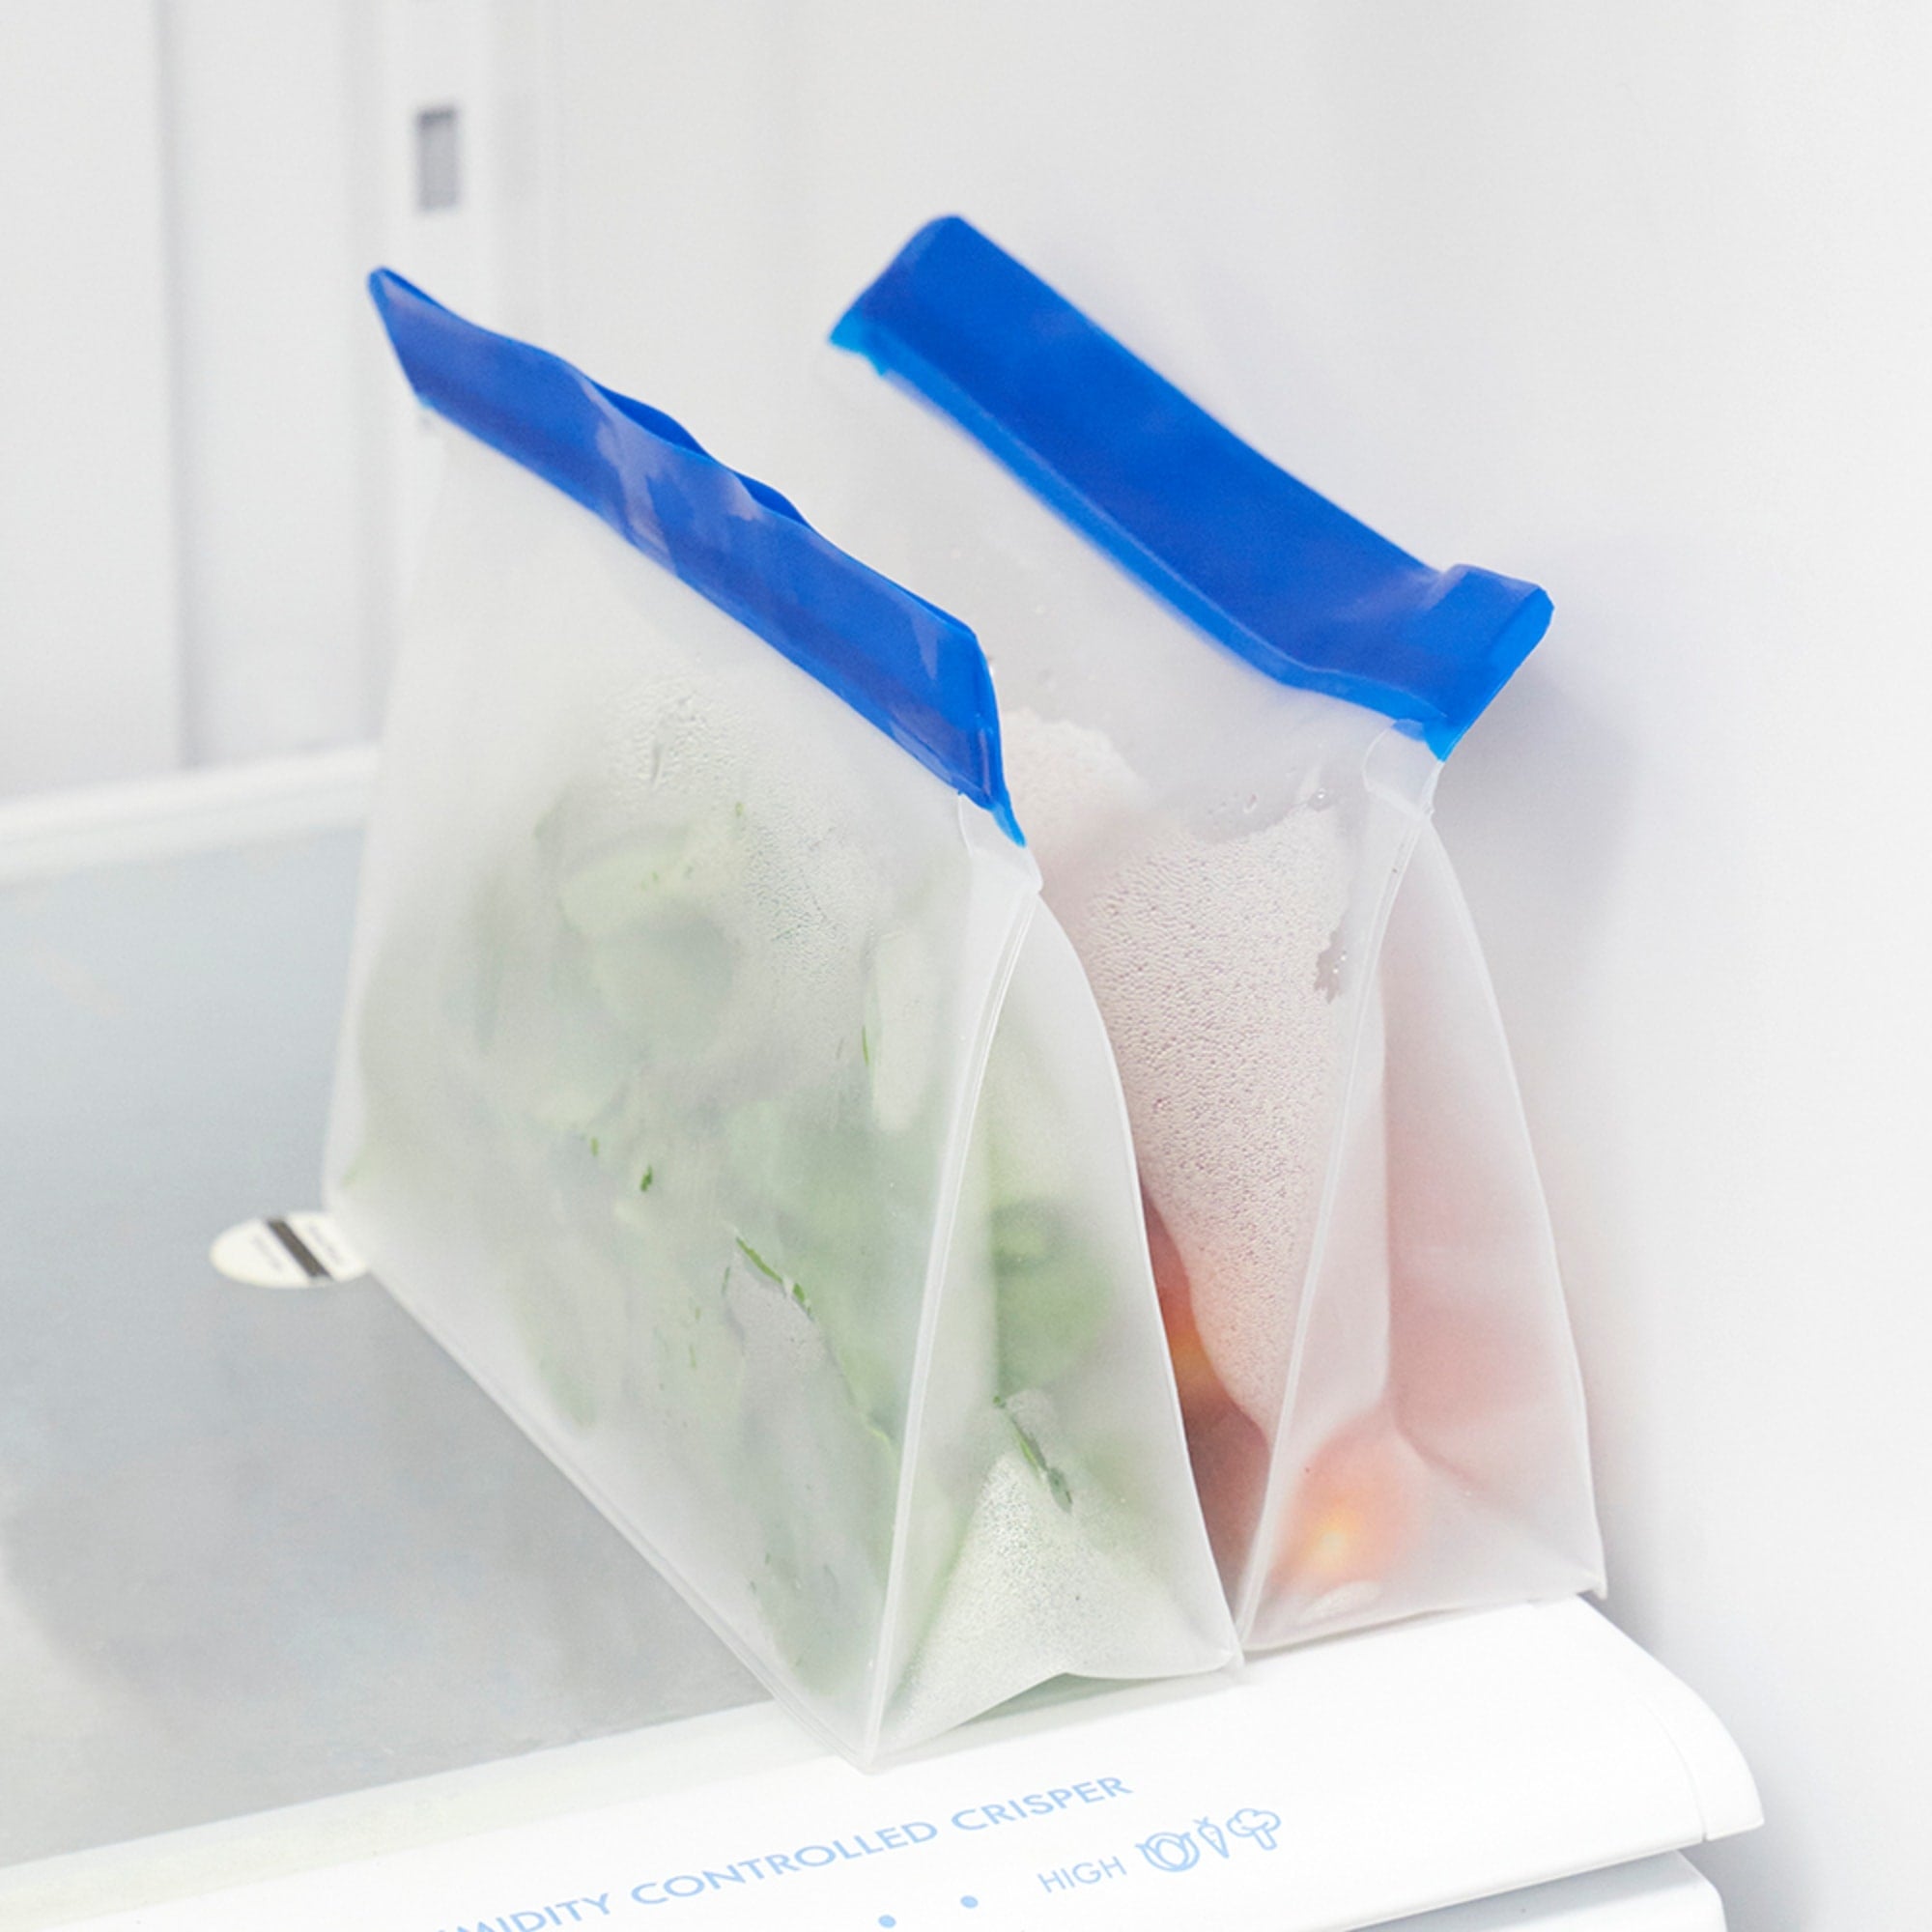 Home Basics 2 Piece Reusable 5" x 7" PEVA Food Bags, Clear
 $3.00 EACH, CASE PACK OF 24